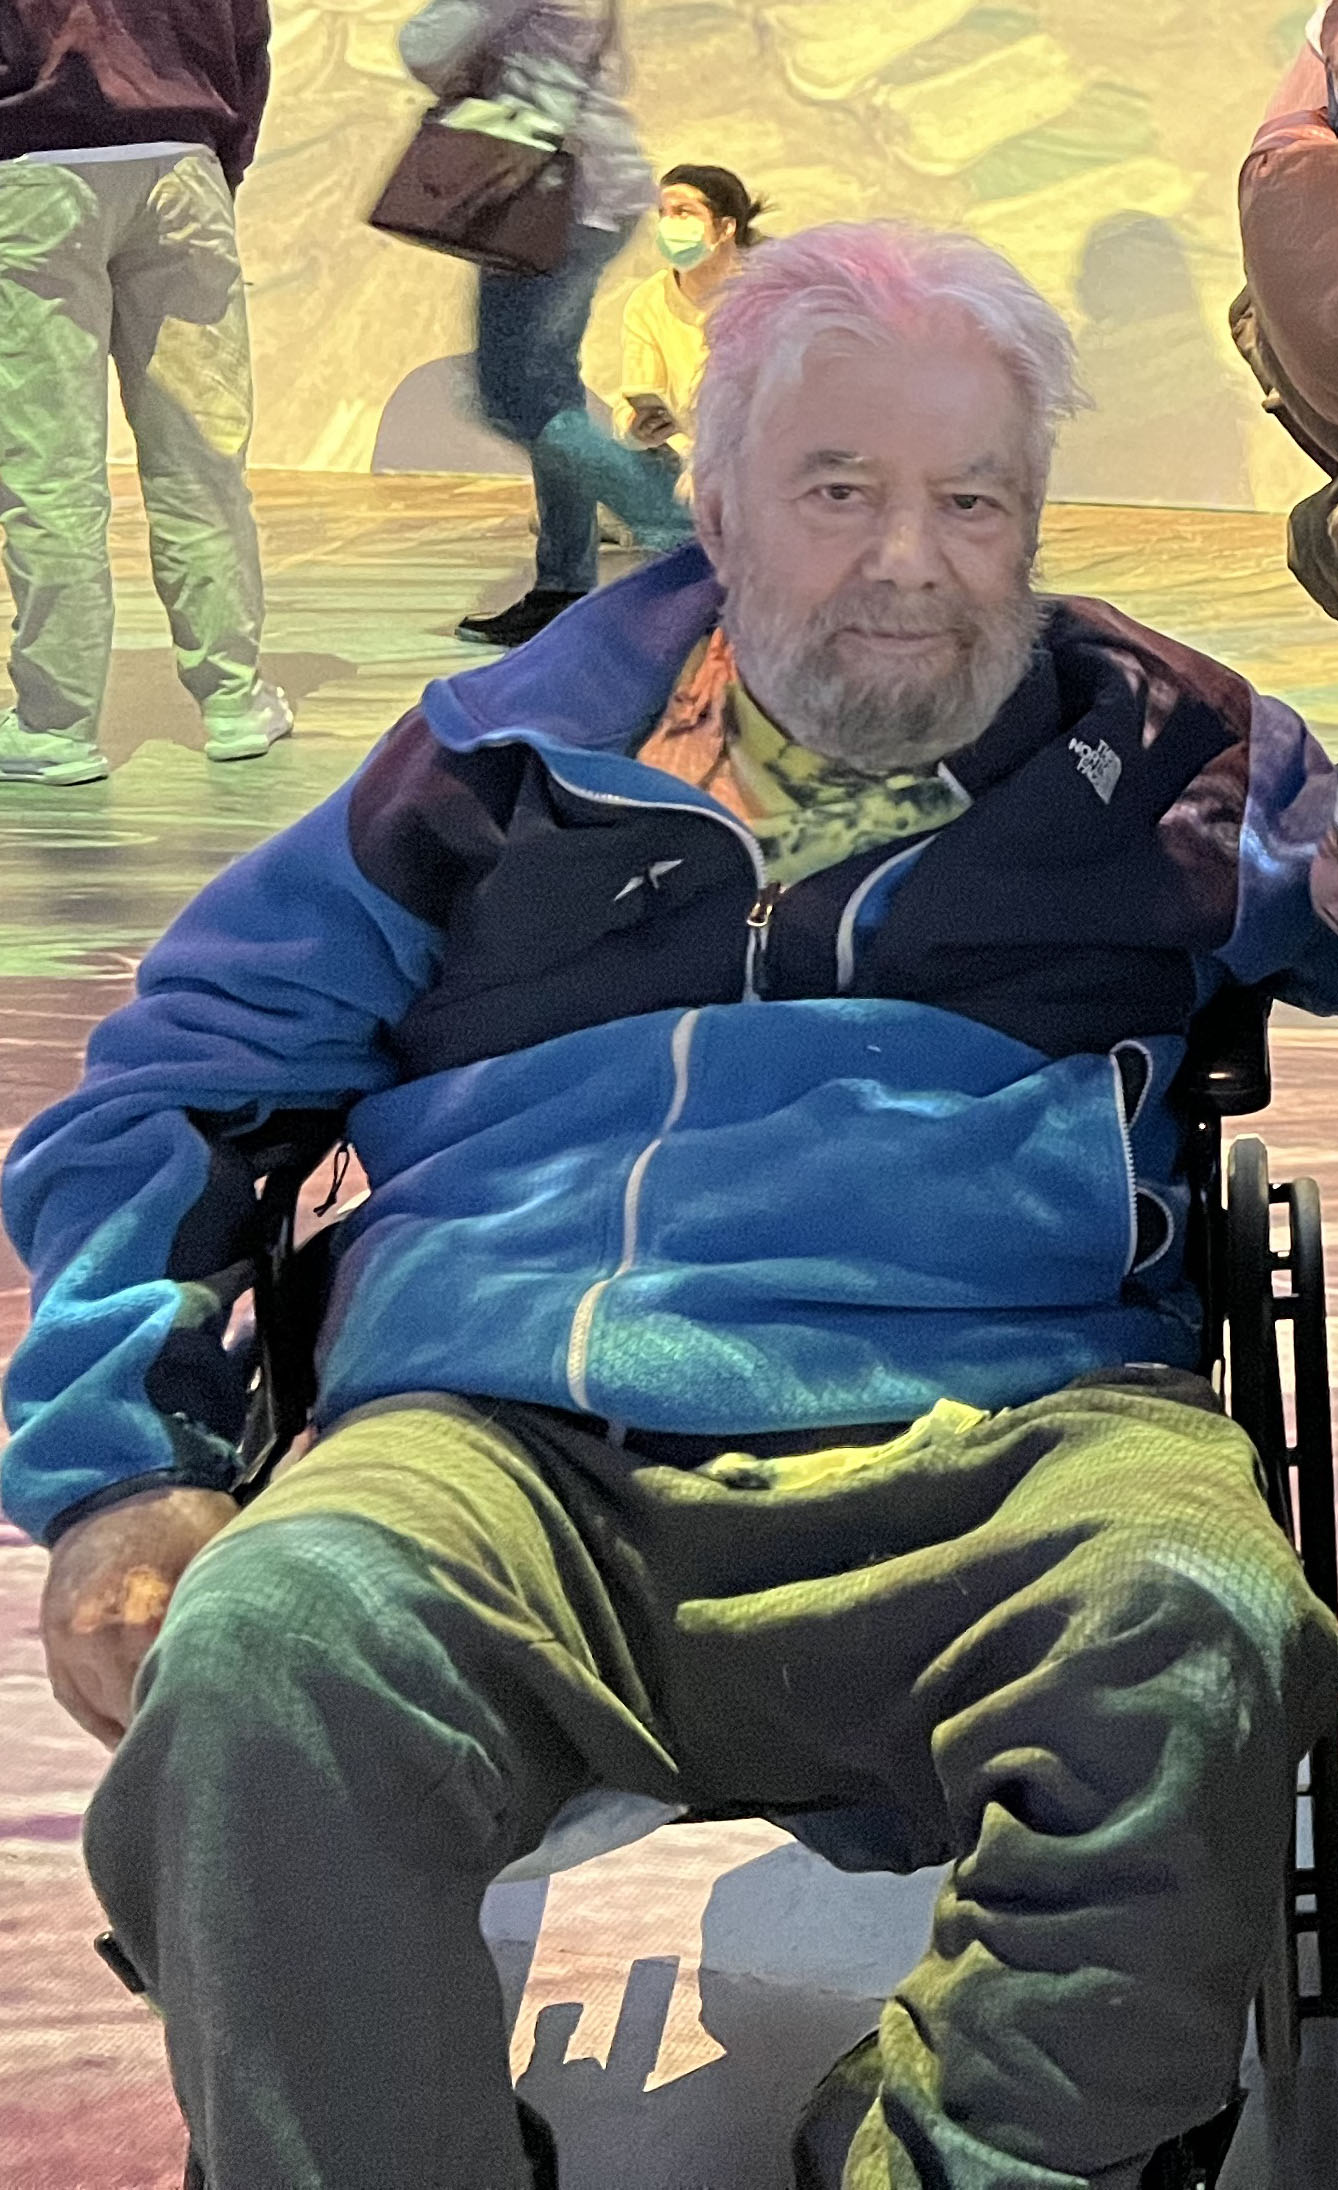 Photo of Keith using a wheelchair. He is an older man with white hair and a beard; he smiles at the camera. He is wearing a winter jacket and sweatpants.